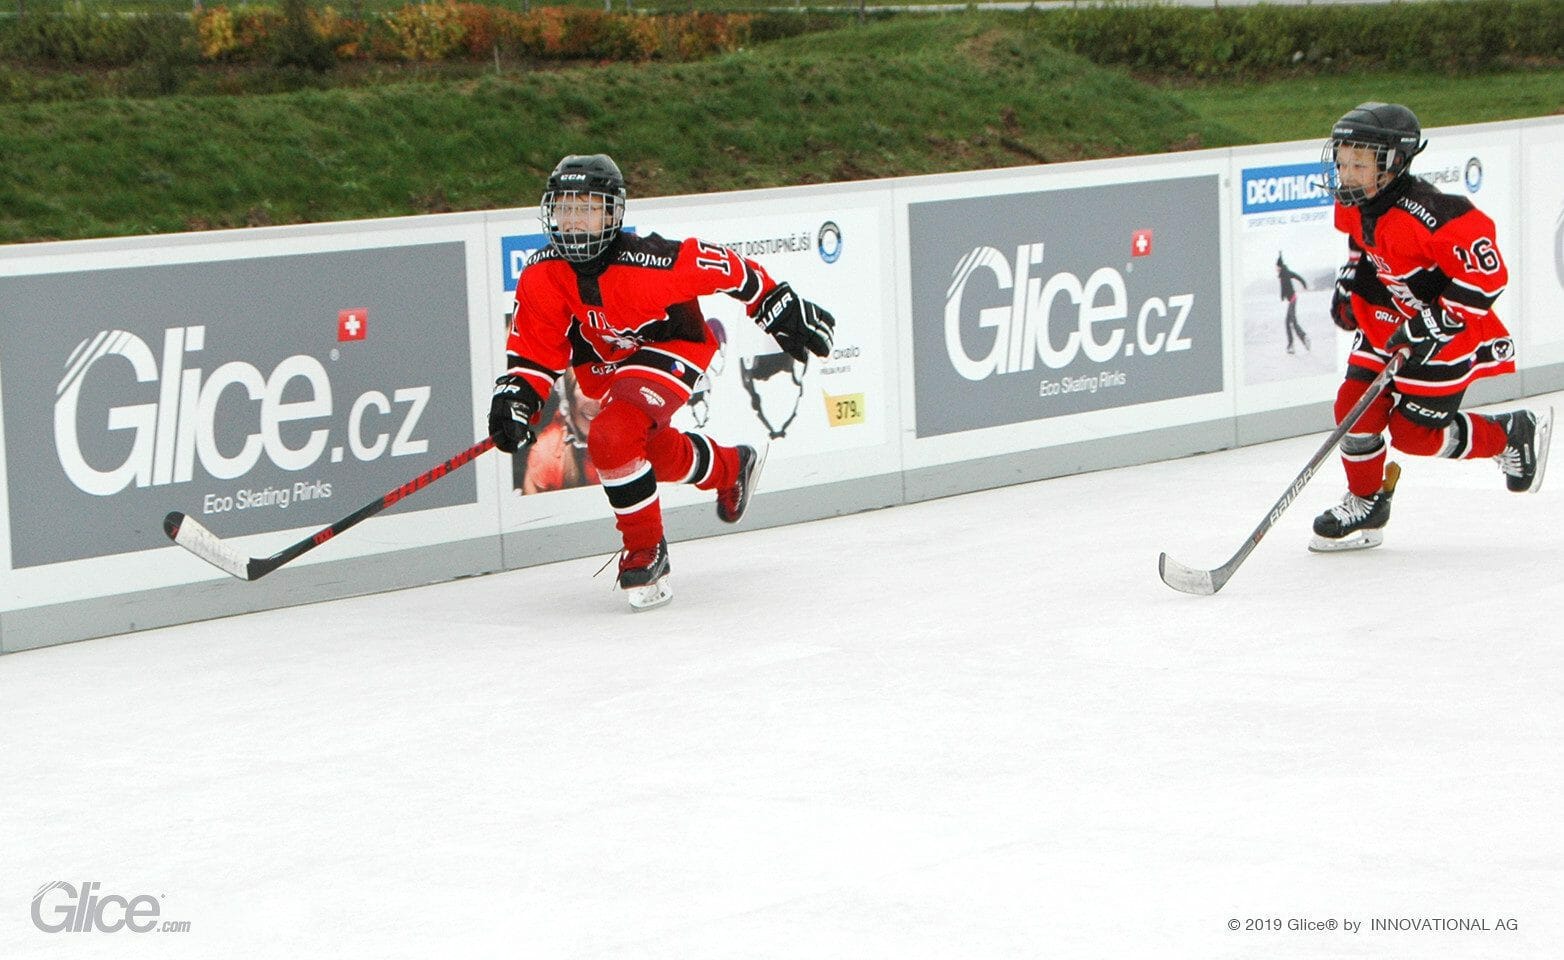 Ice hockey game on Glice rink - buy synthetic ice